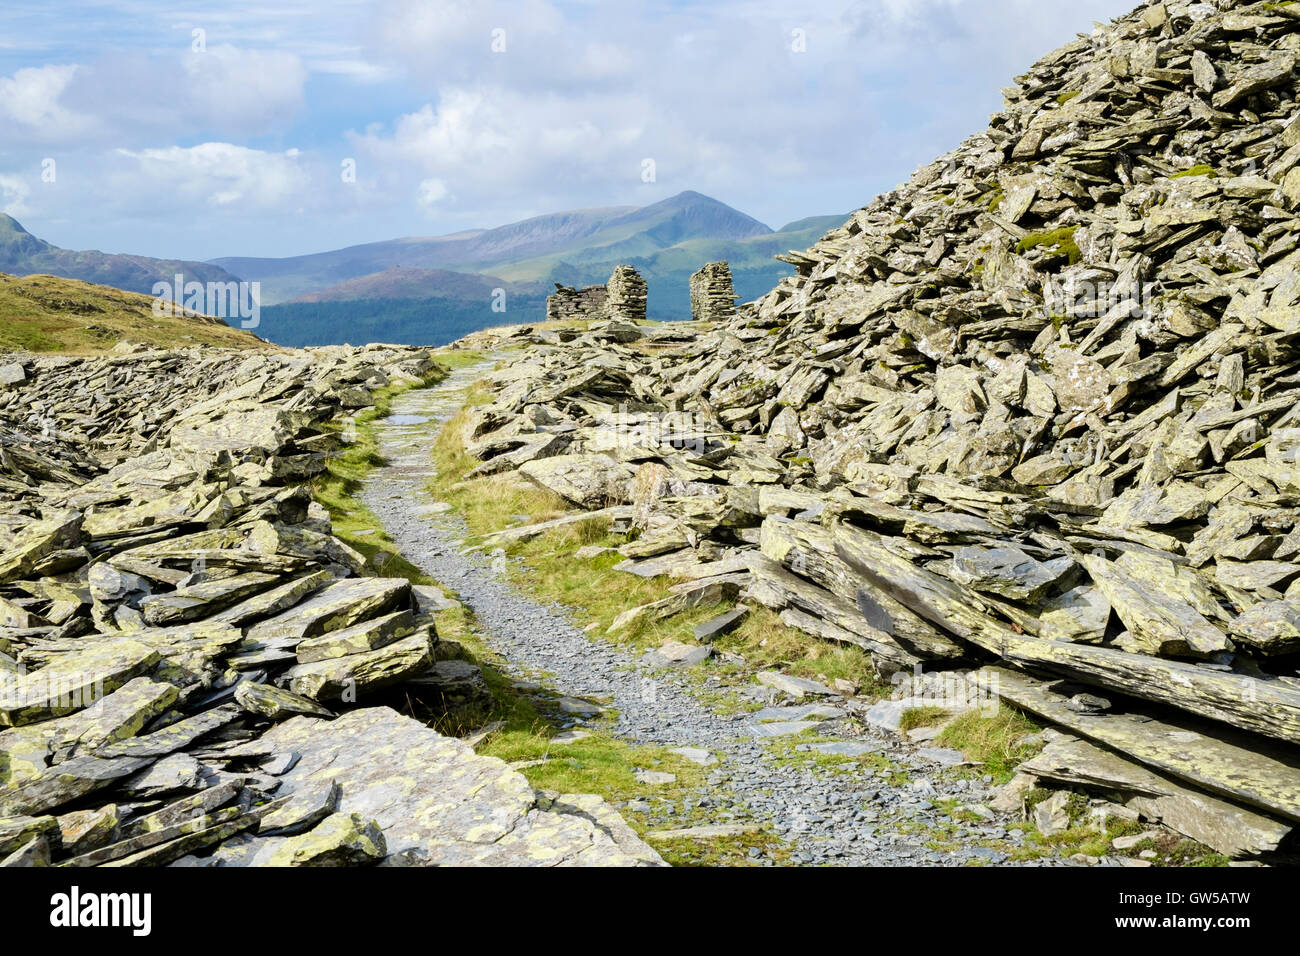 Track from Rhyd Ddu to Bwlch Cwm Llan through disused slate quarry slag heaps on slopes of Mount Snowdon in Snowdonia National Park (Eryri) Wales UK Stock Photo